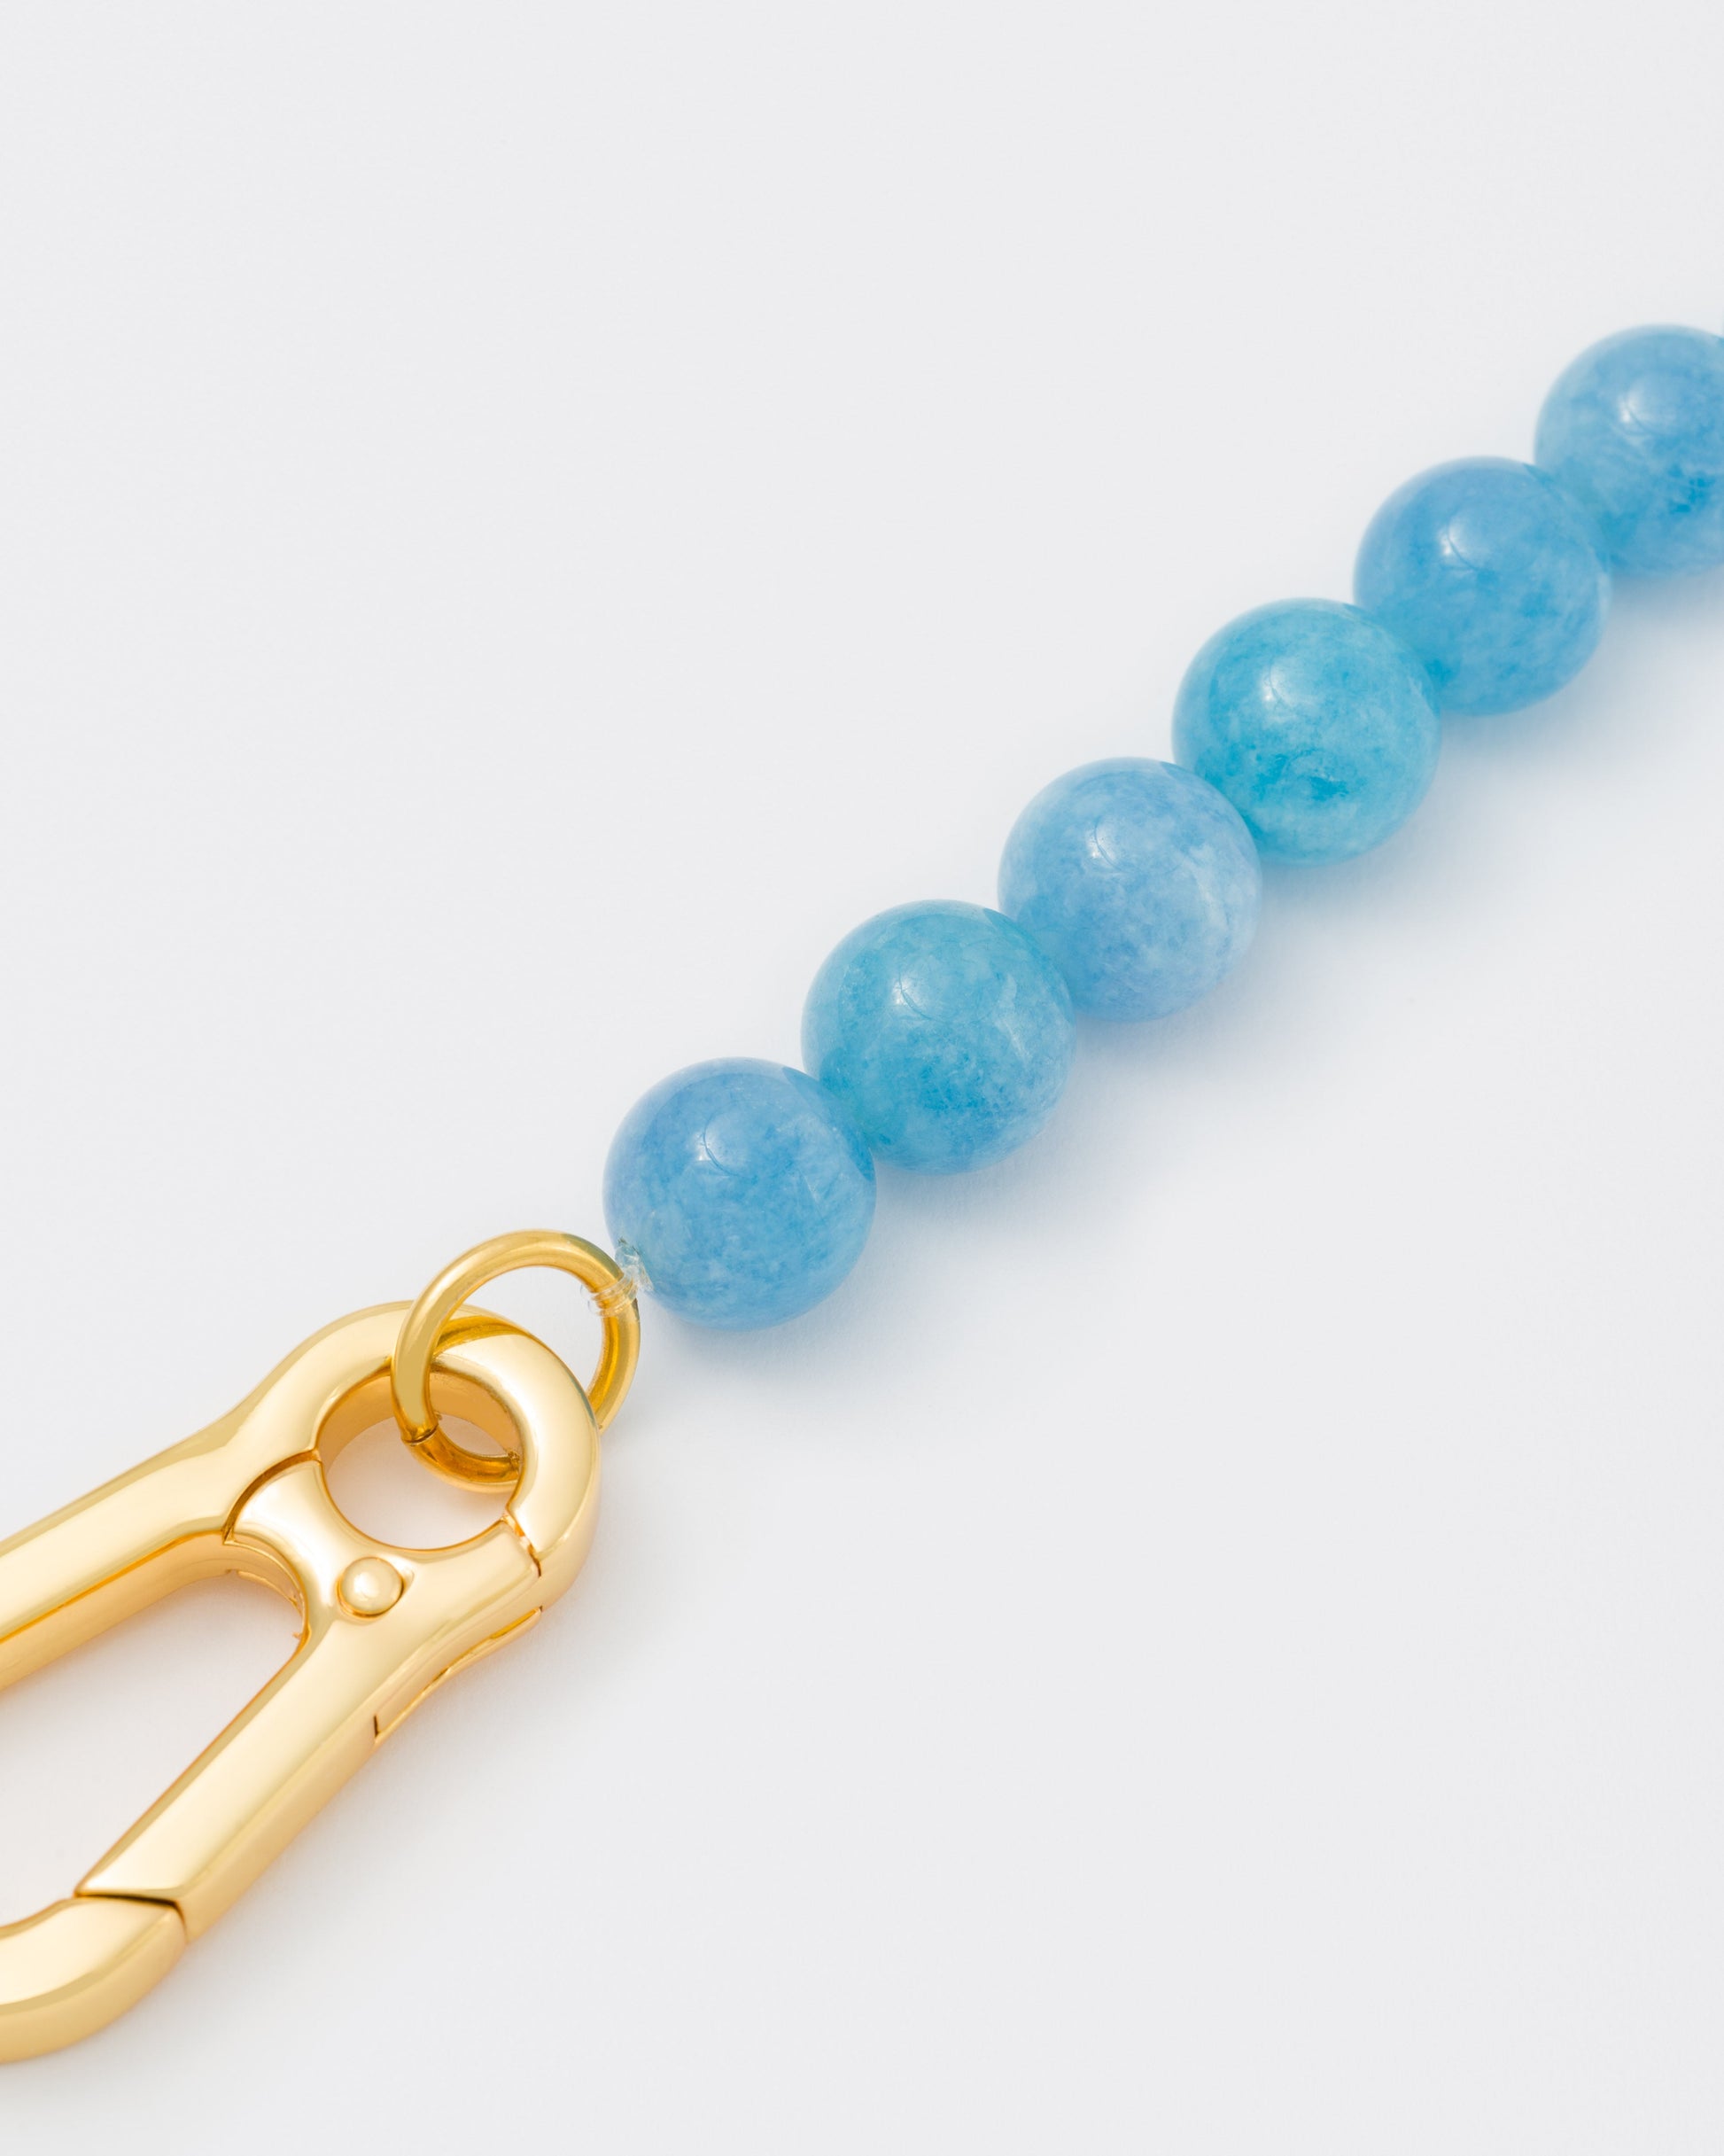 detail of Aquamarine stones necklace with 18k yellow gold coated lasered logo oversize carabiner clasp.